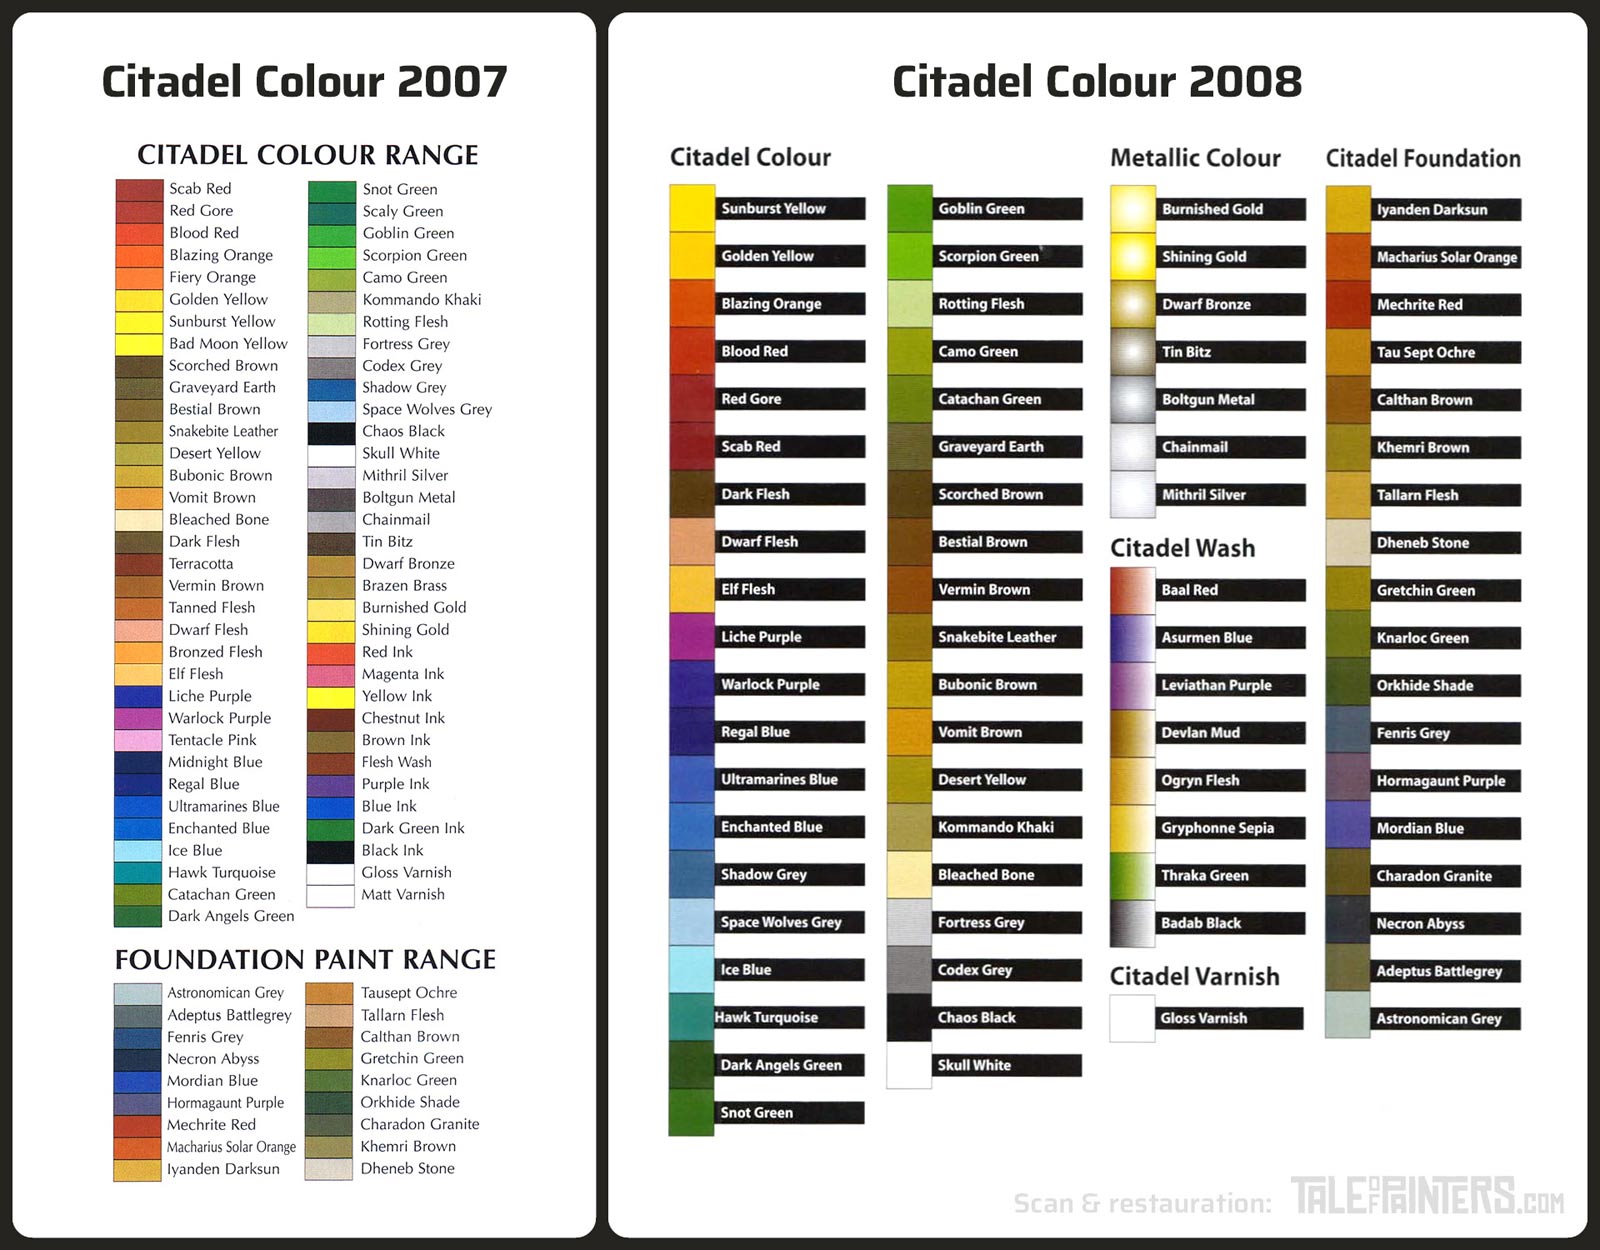 Colour swatches of the Citadel Colour 2007 and 2008 ranges